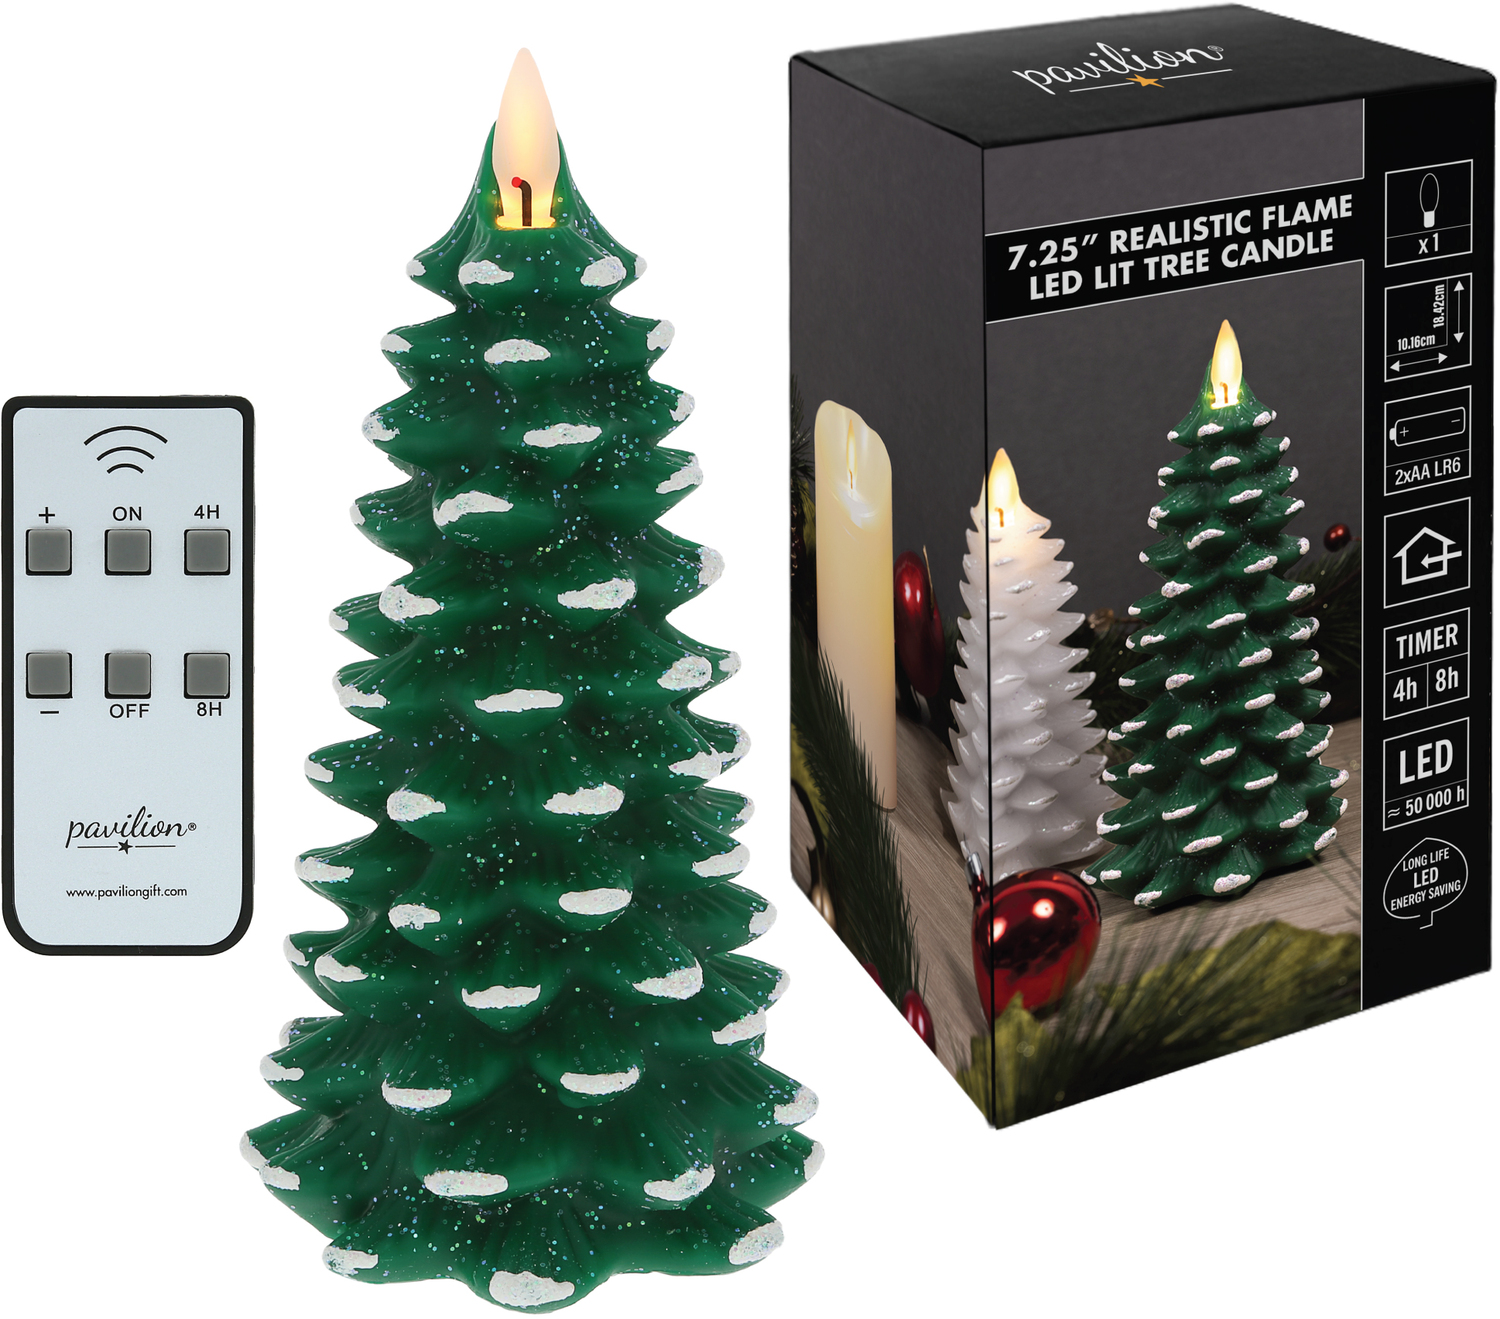 Green Frosted Pine Tree by Pavilion Accessories - Green Frosted Pine Tree - 7.25" Realistic Flame LED Lit Candle